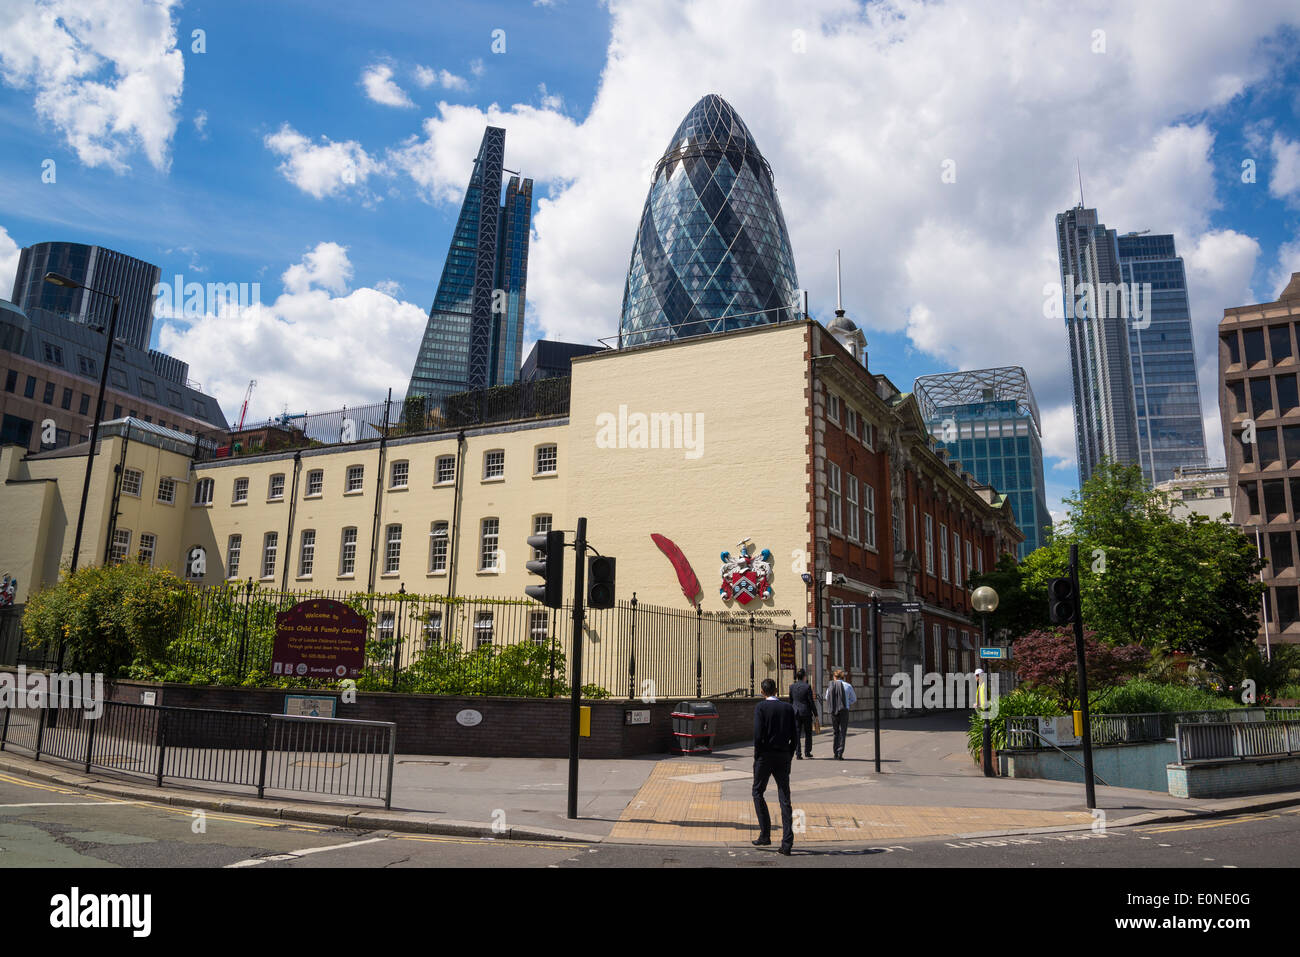 Swiss Re Tower from Aldgate, City of London, UK Stock Photo